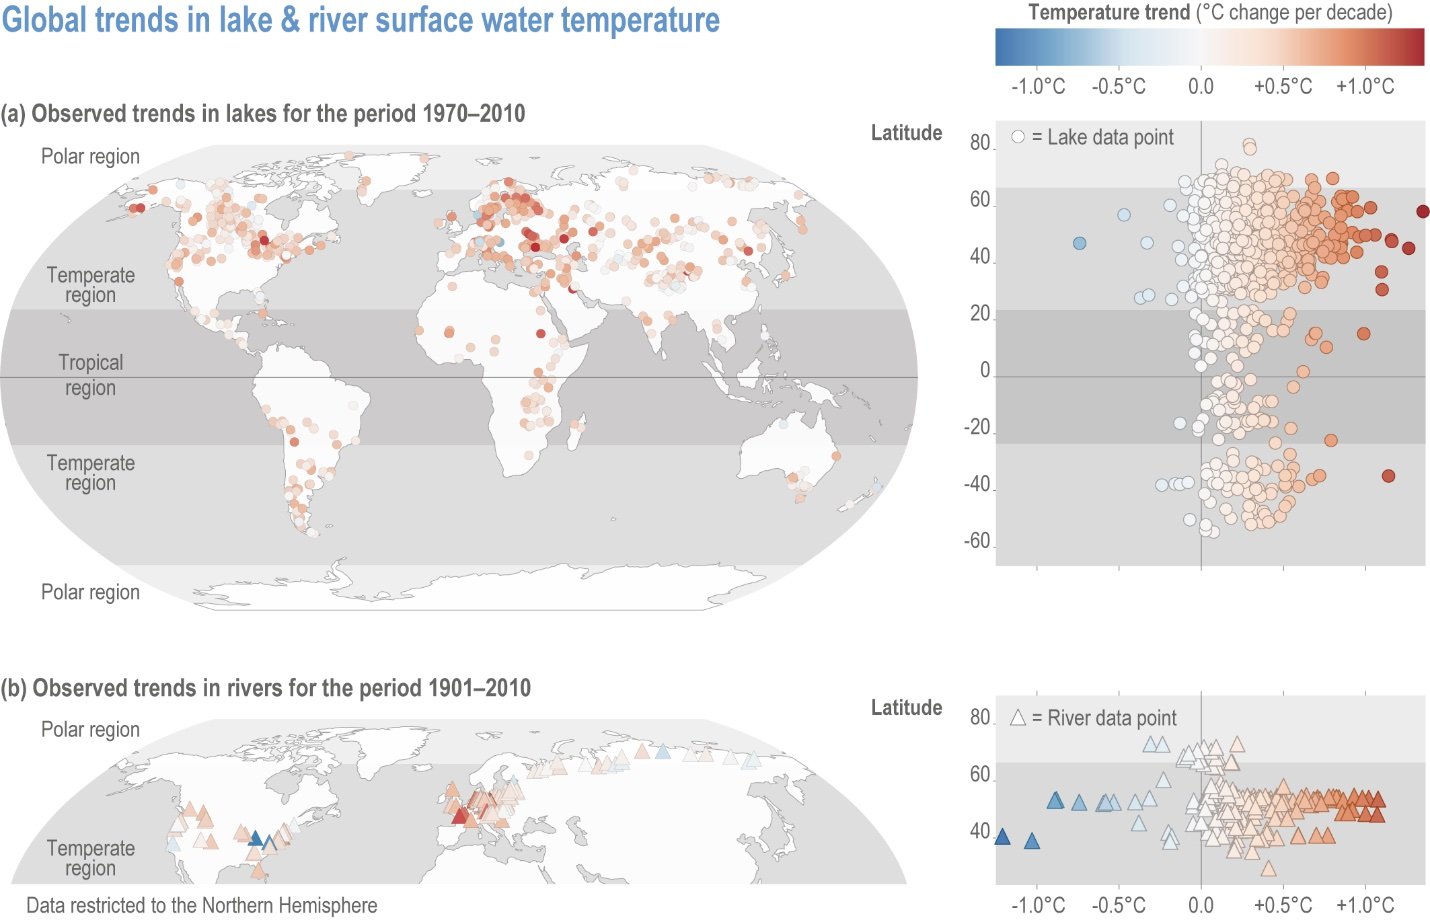 Observed global trends in lake and river surface water temperature (based on data from Woolway et al 2020b)Source: IPCC AR6 WGII